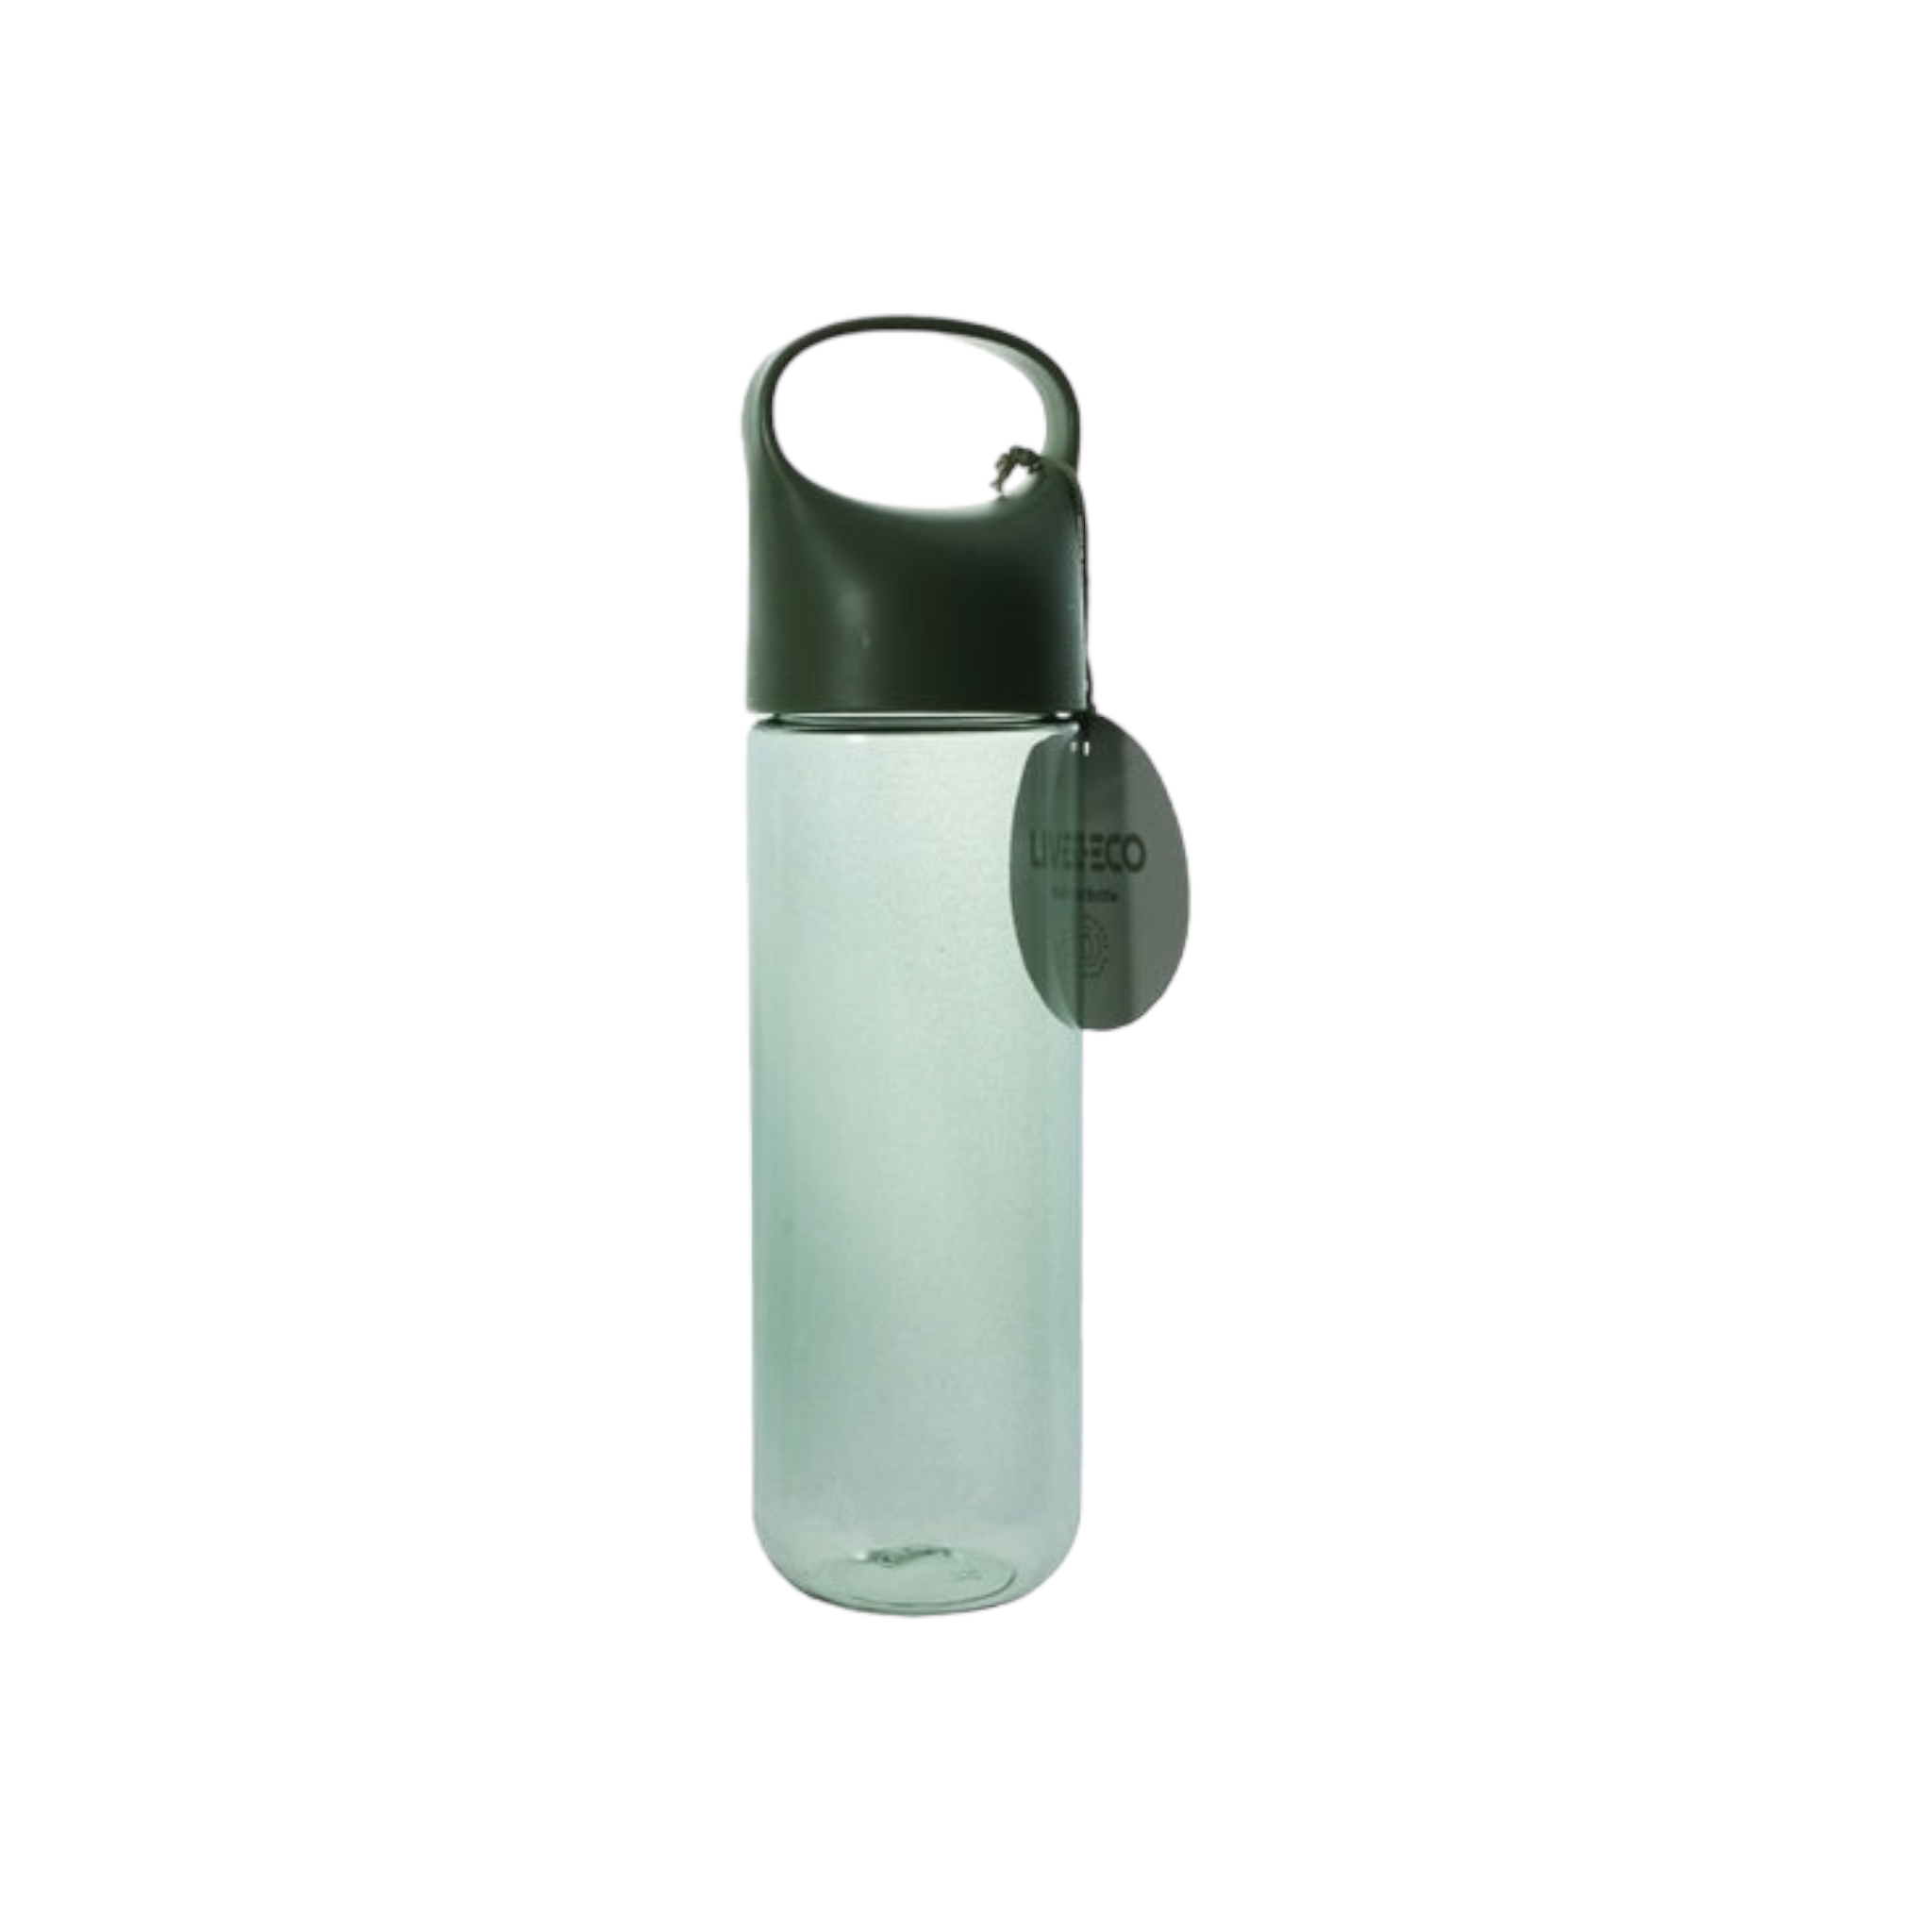 Live Eco Water Bottle Greenland 11820